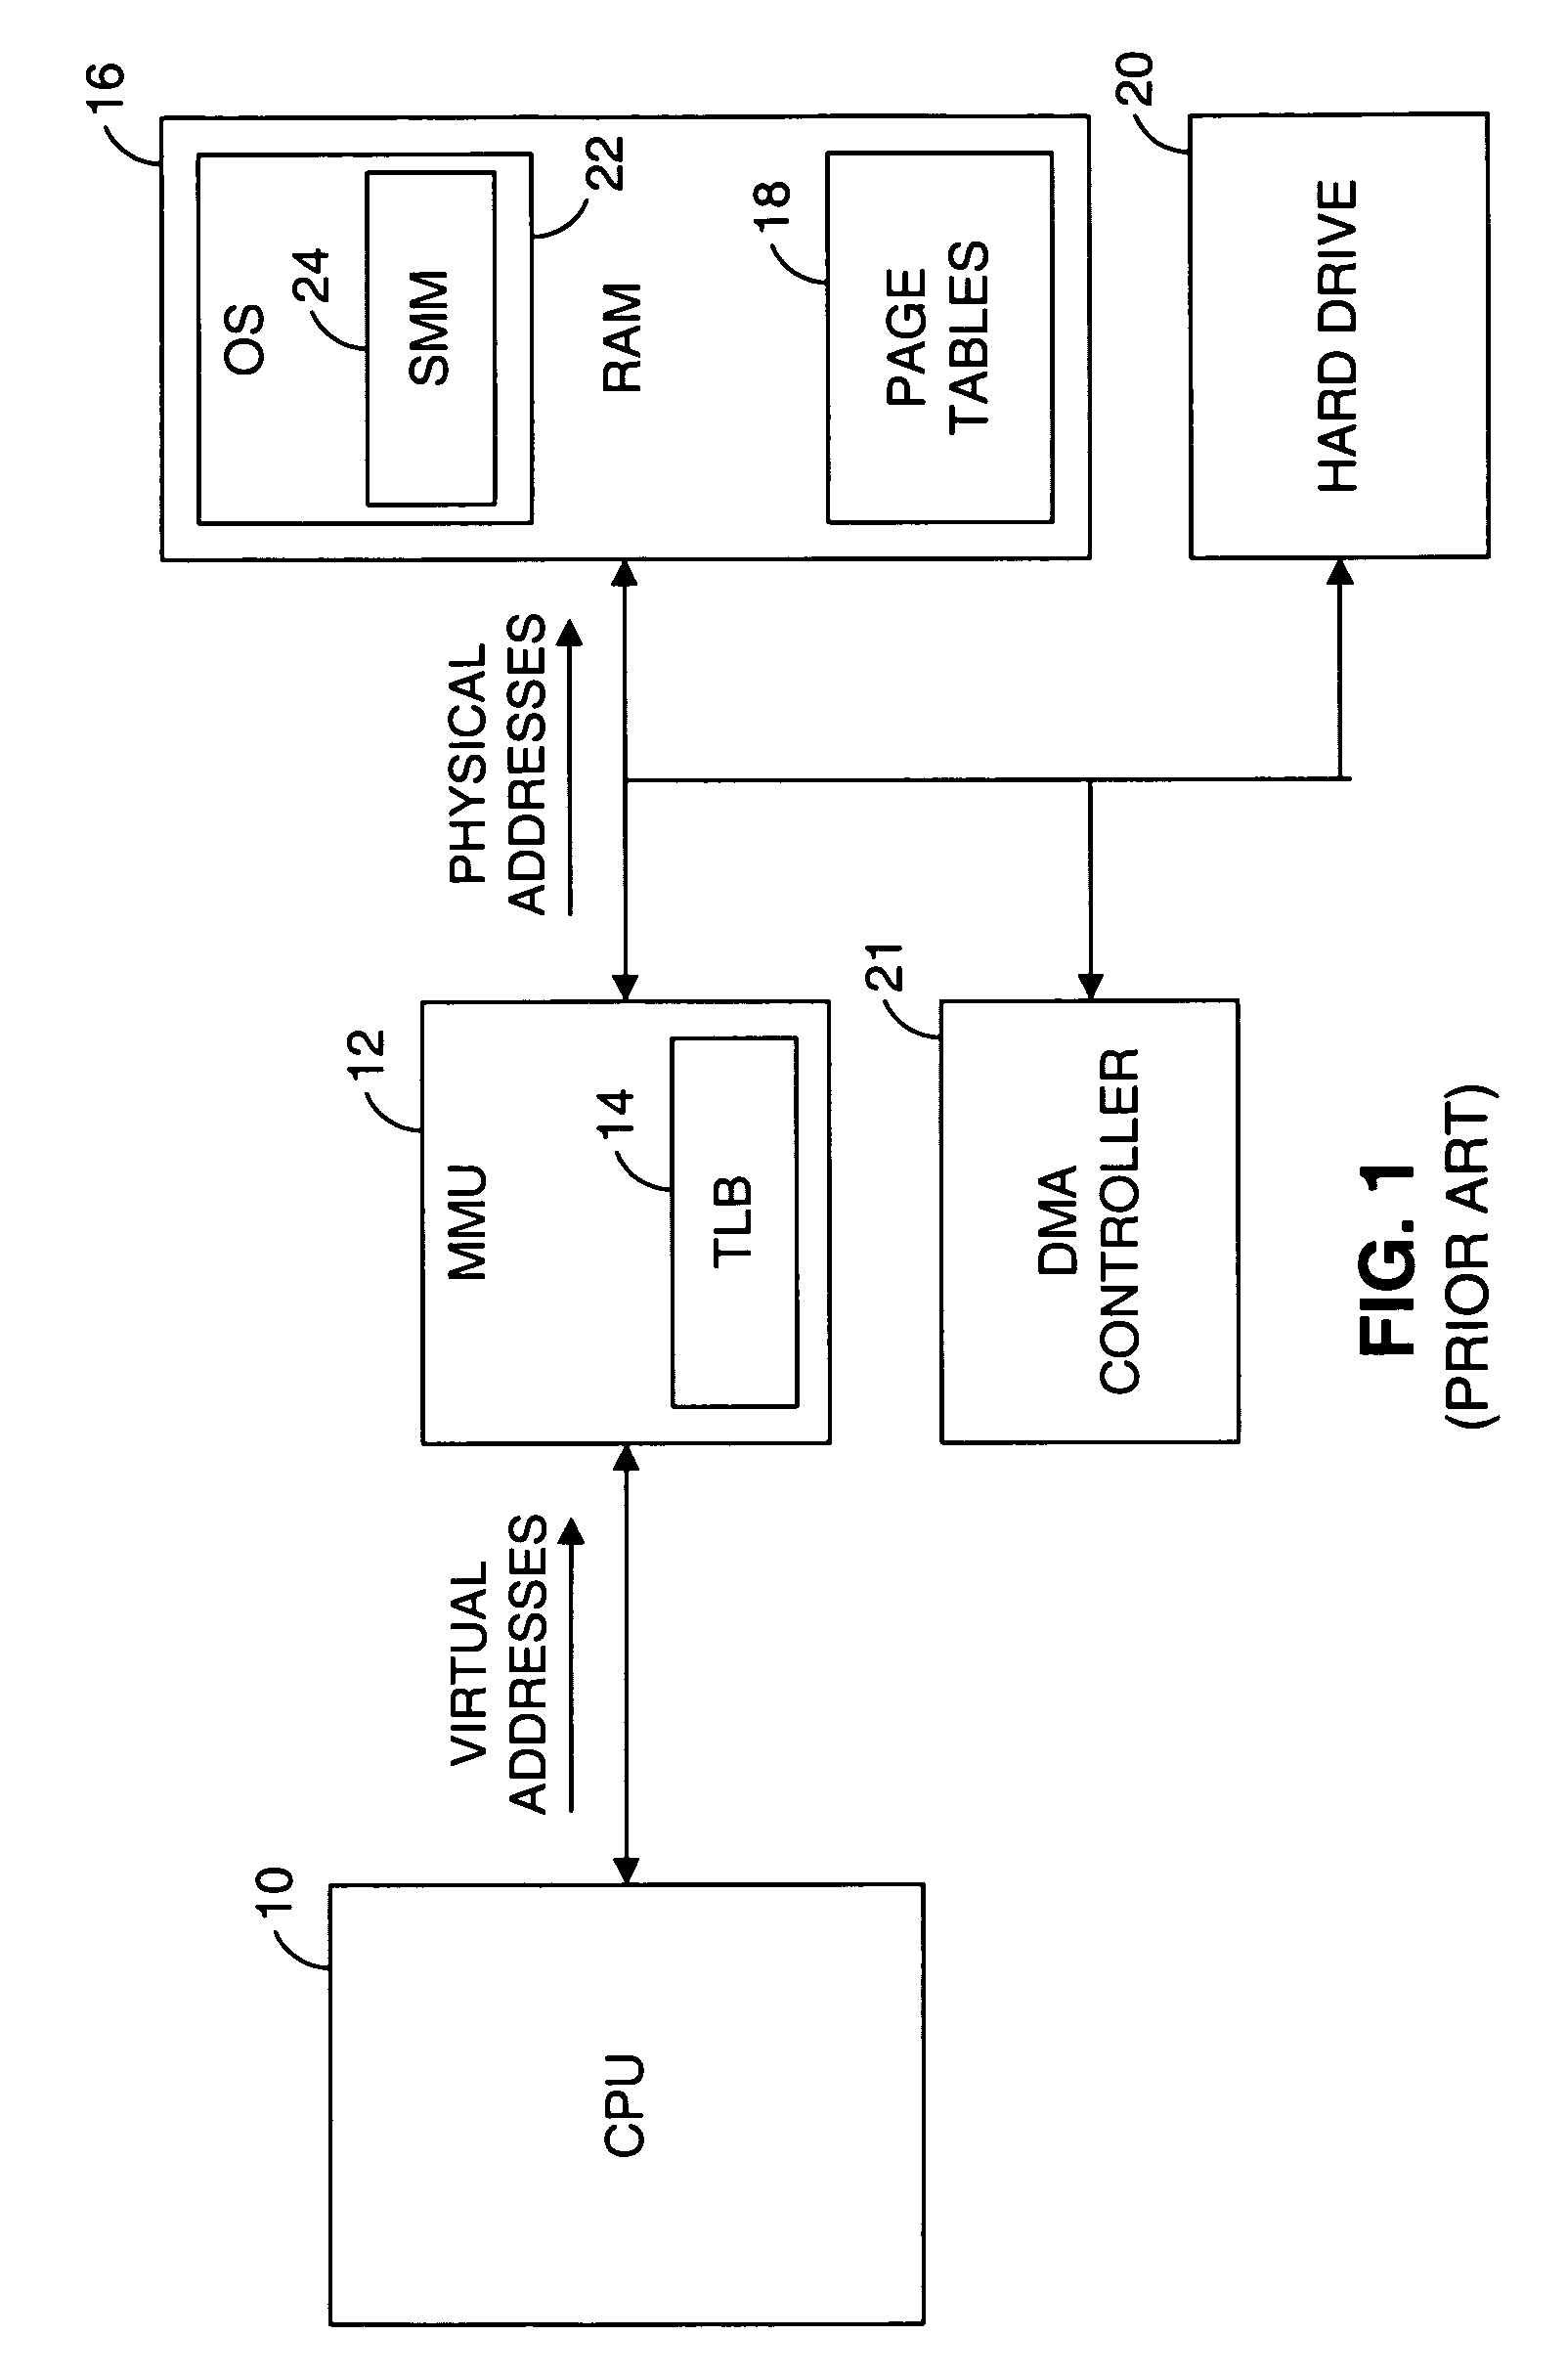 Maintaining coherency of derived data in a computer system